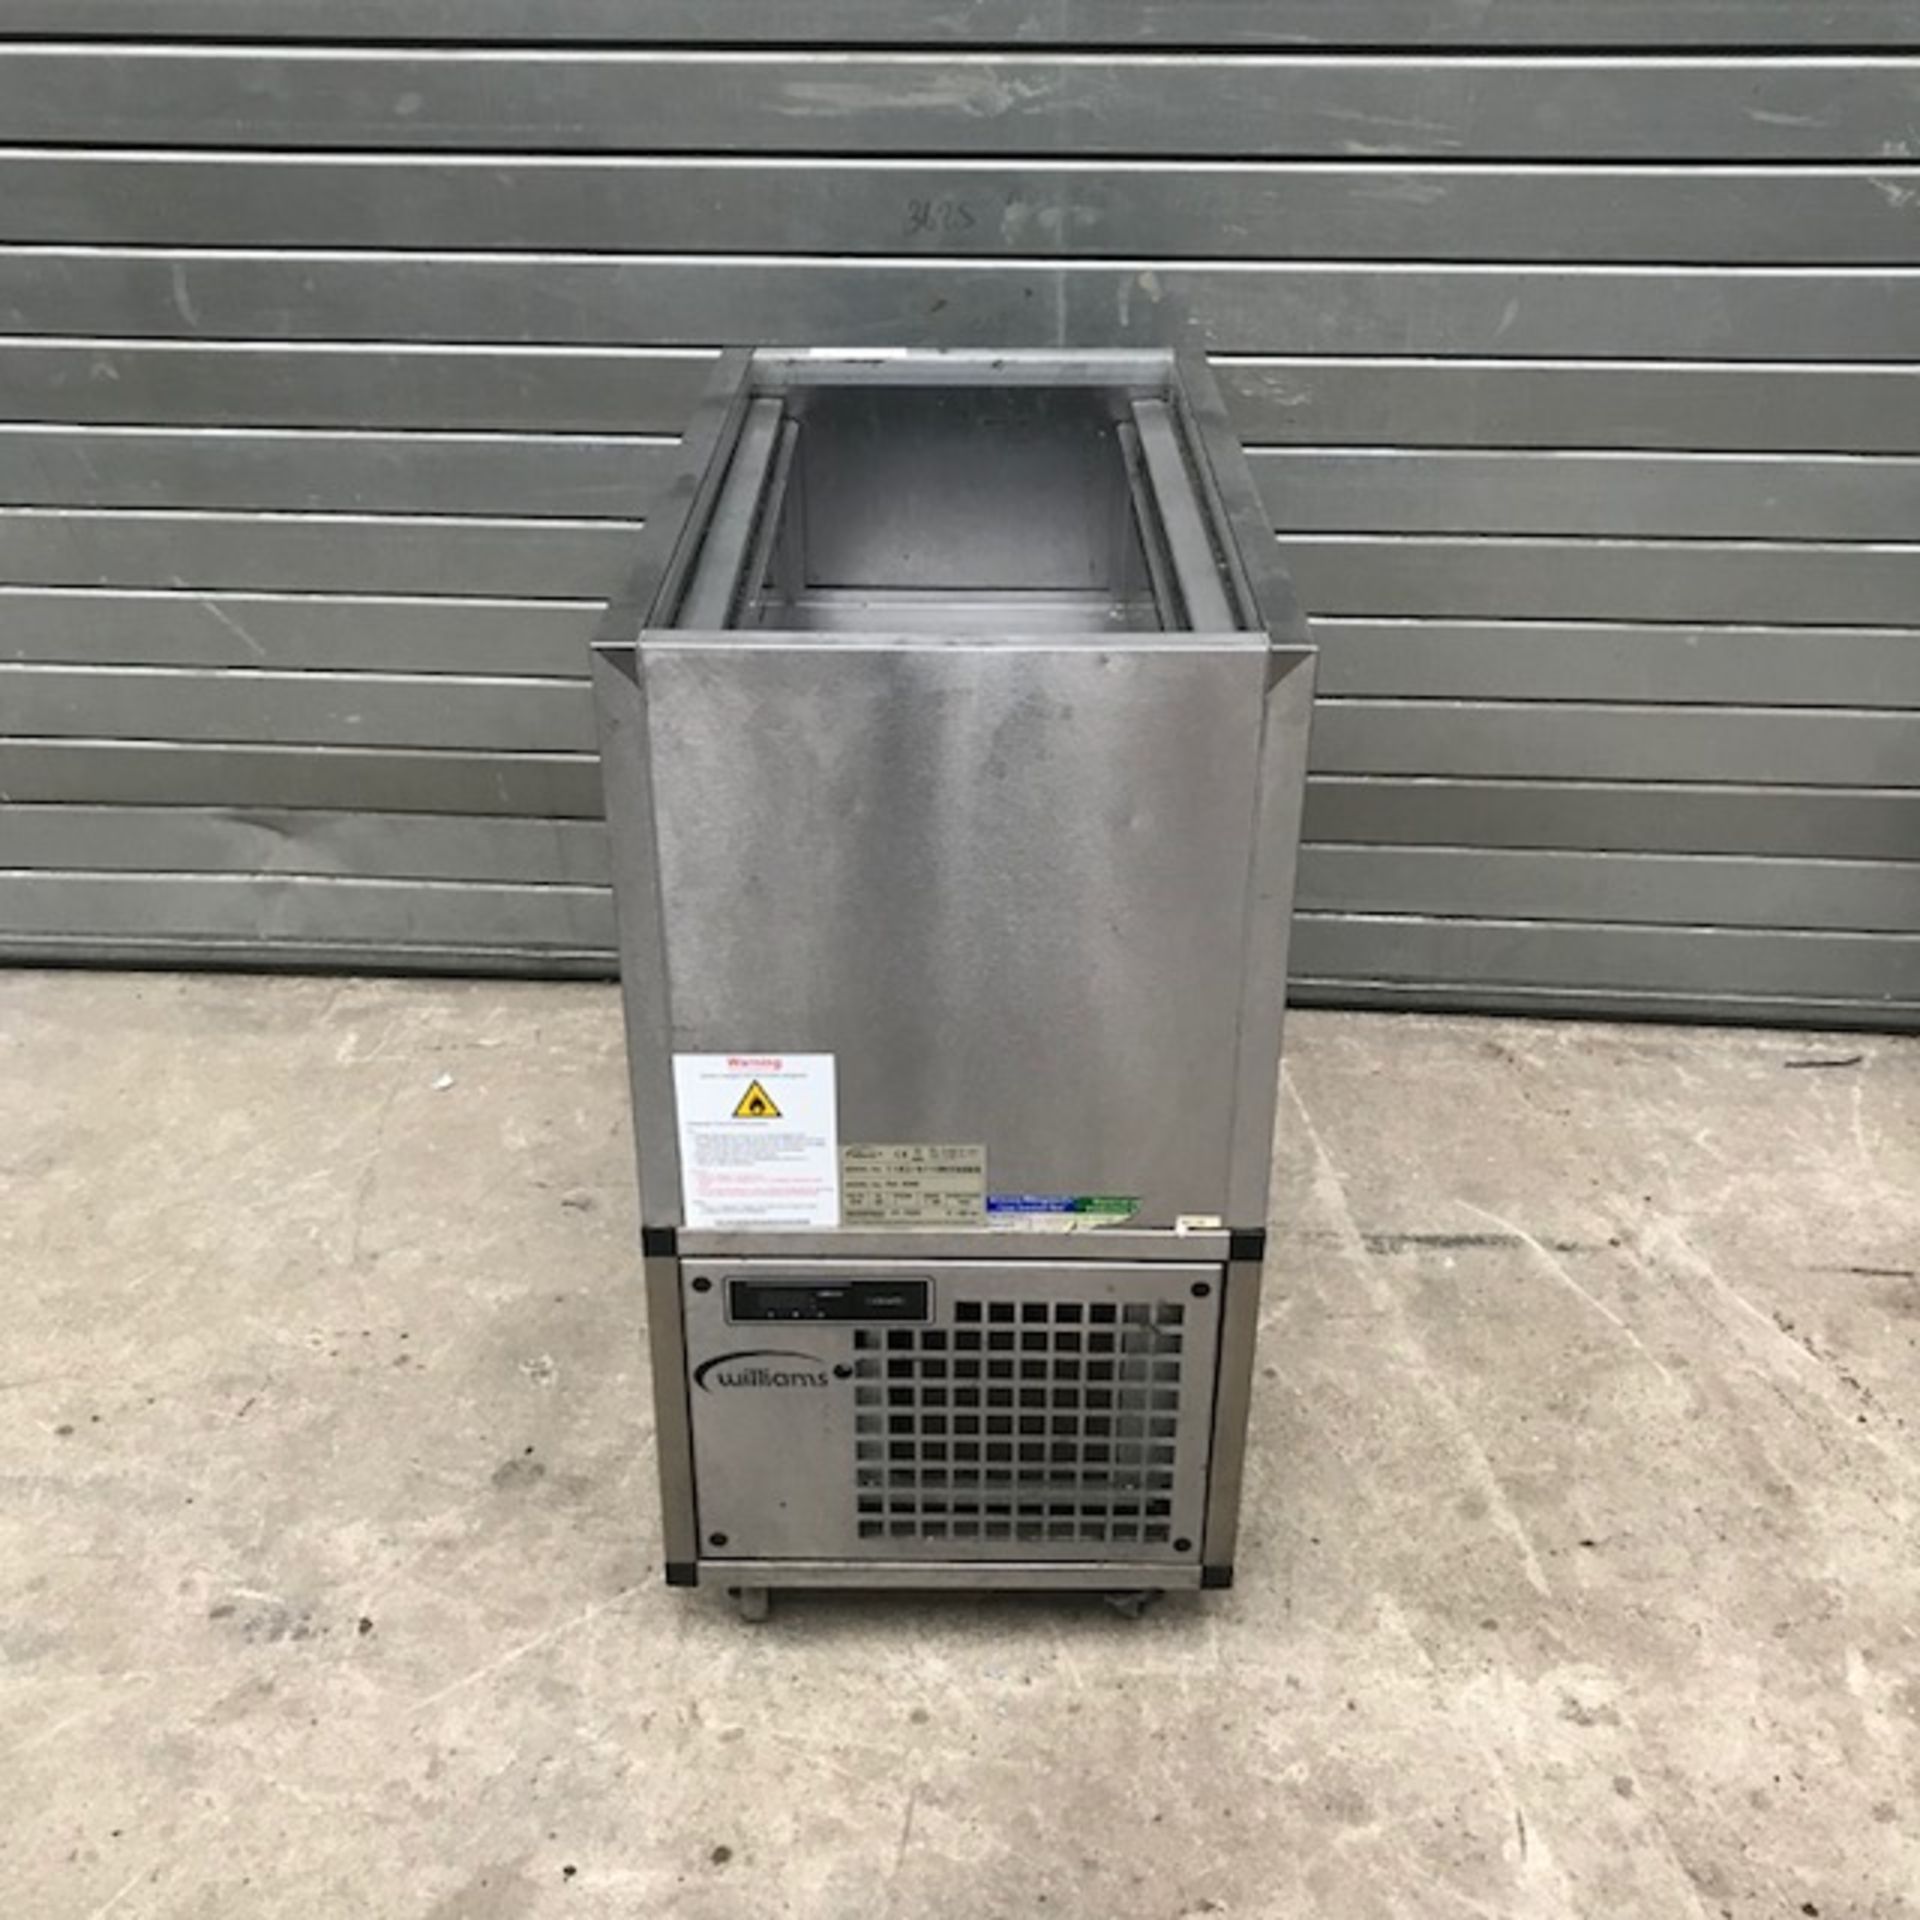 Williams PW4 R290 Chilled Prep Top The PW4 mobile refrigerated prep well is the perfect solution for